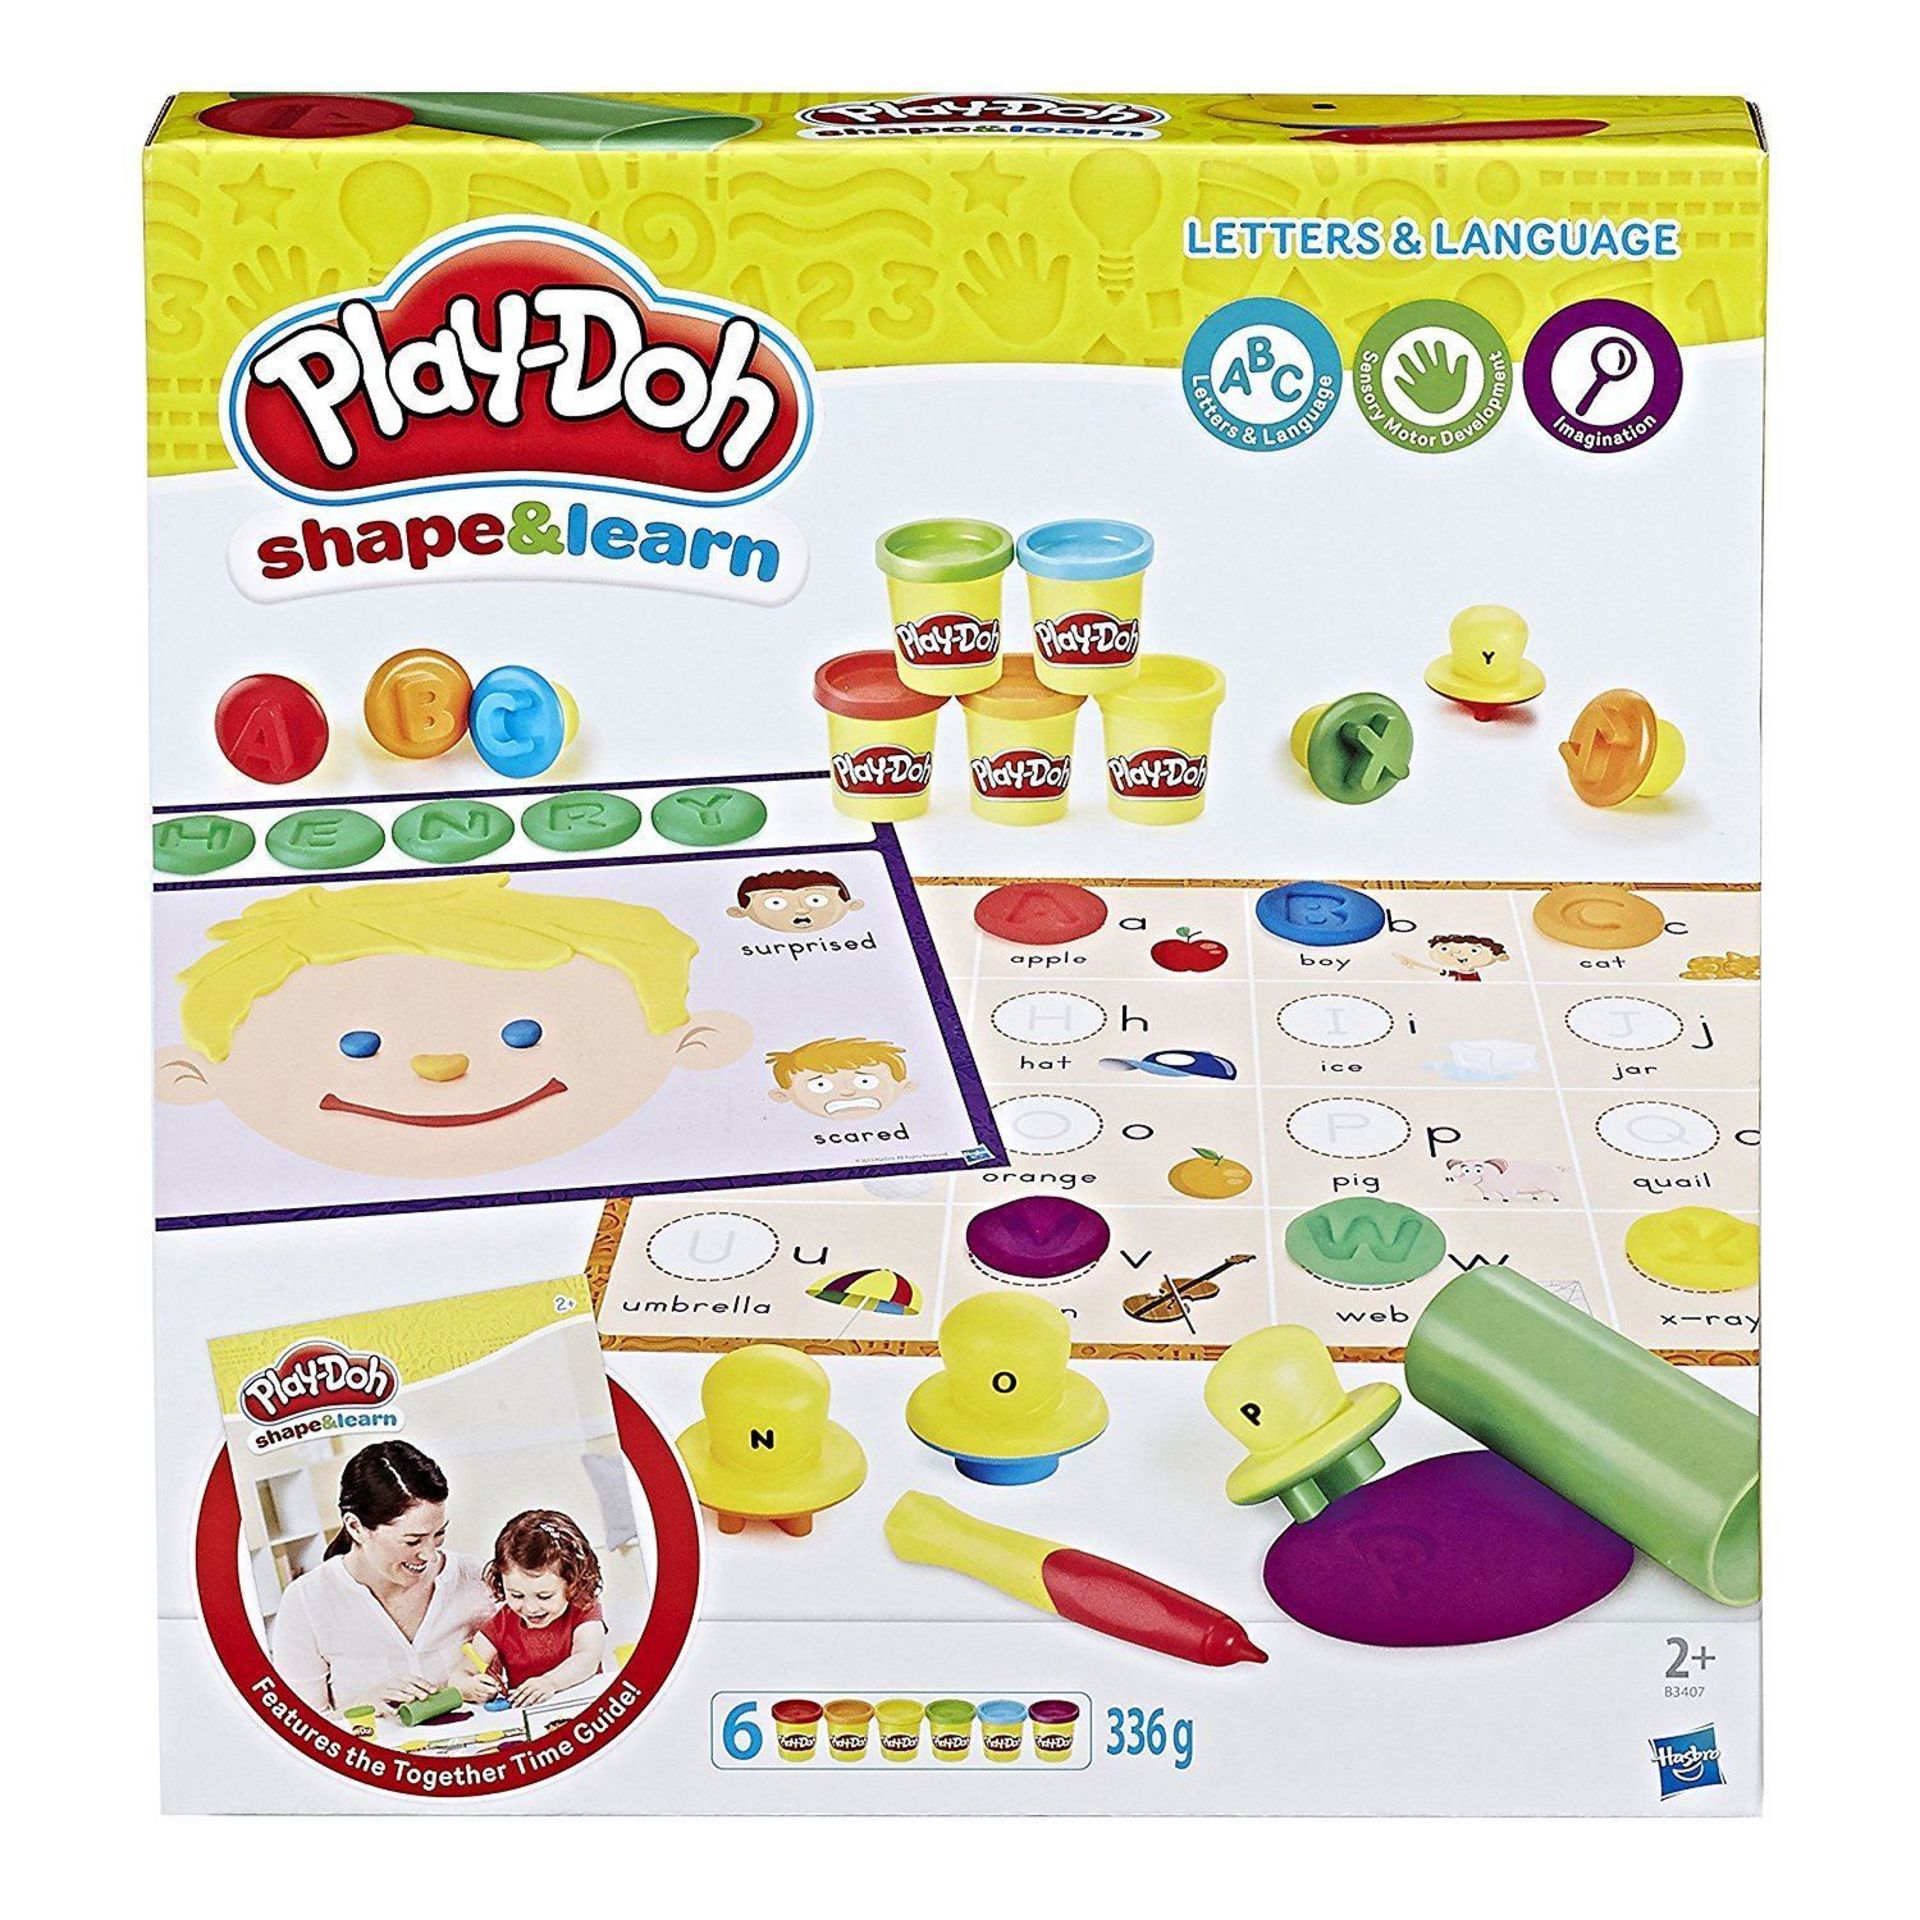 V Brand New Play-Doh Shape & Learn Letters and Language - JohnLewis.com Price £25.47 - Easy For